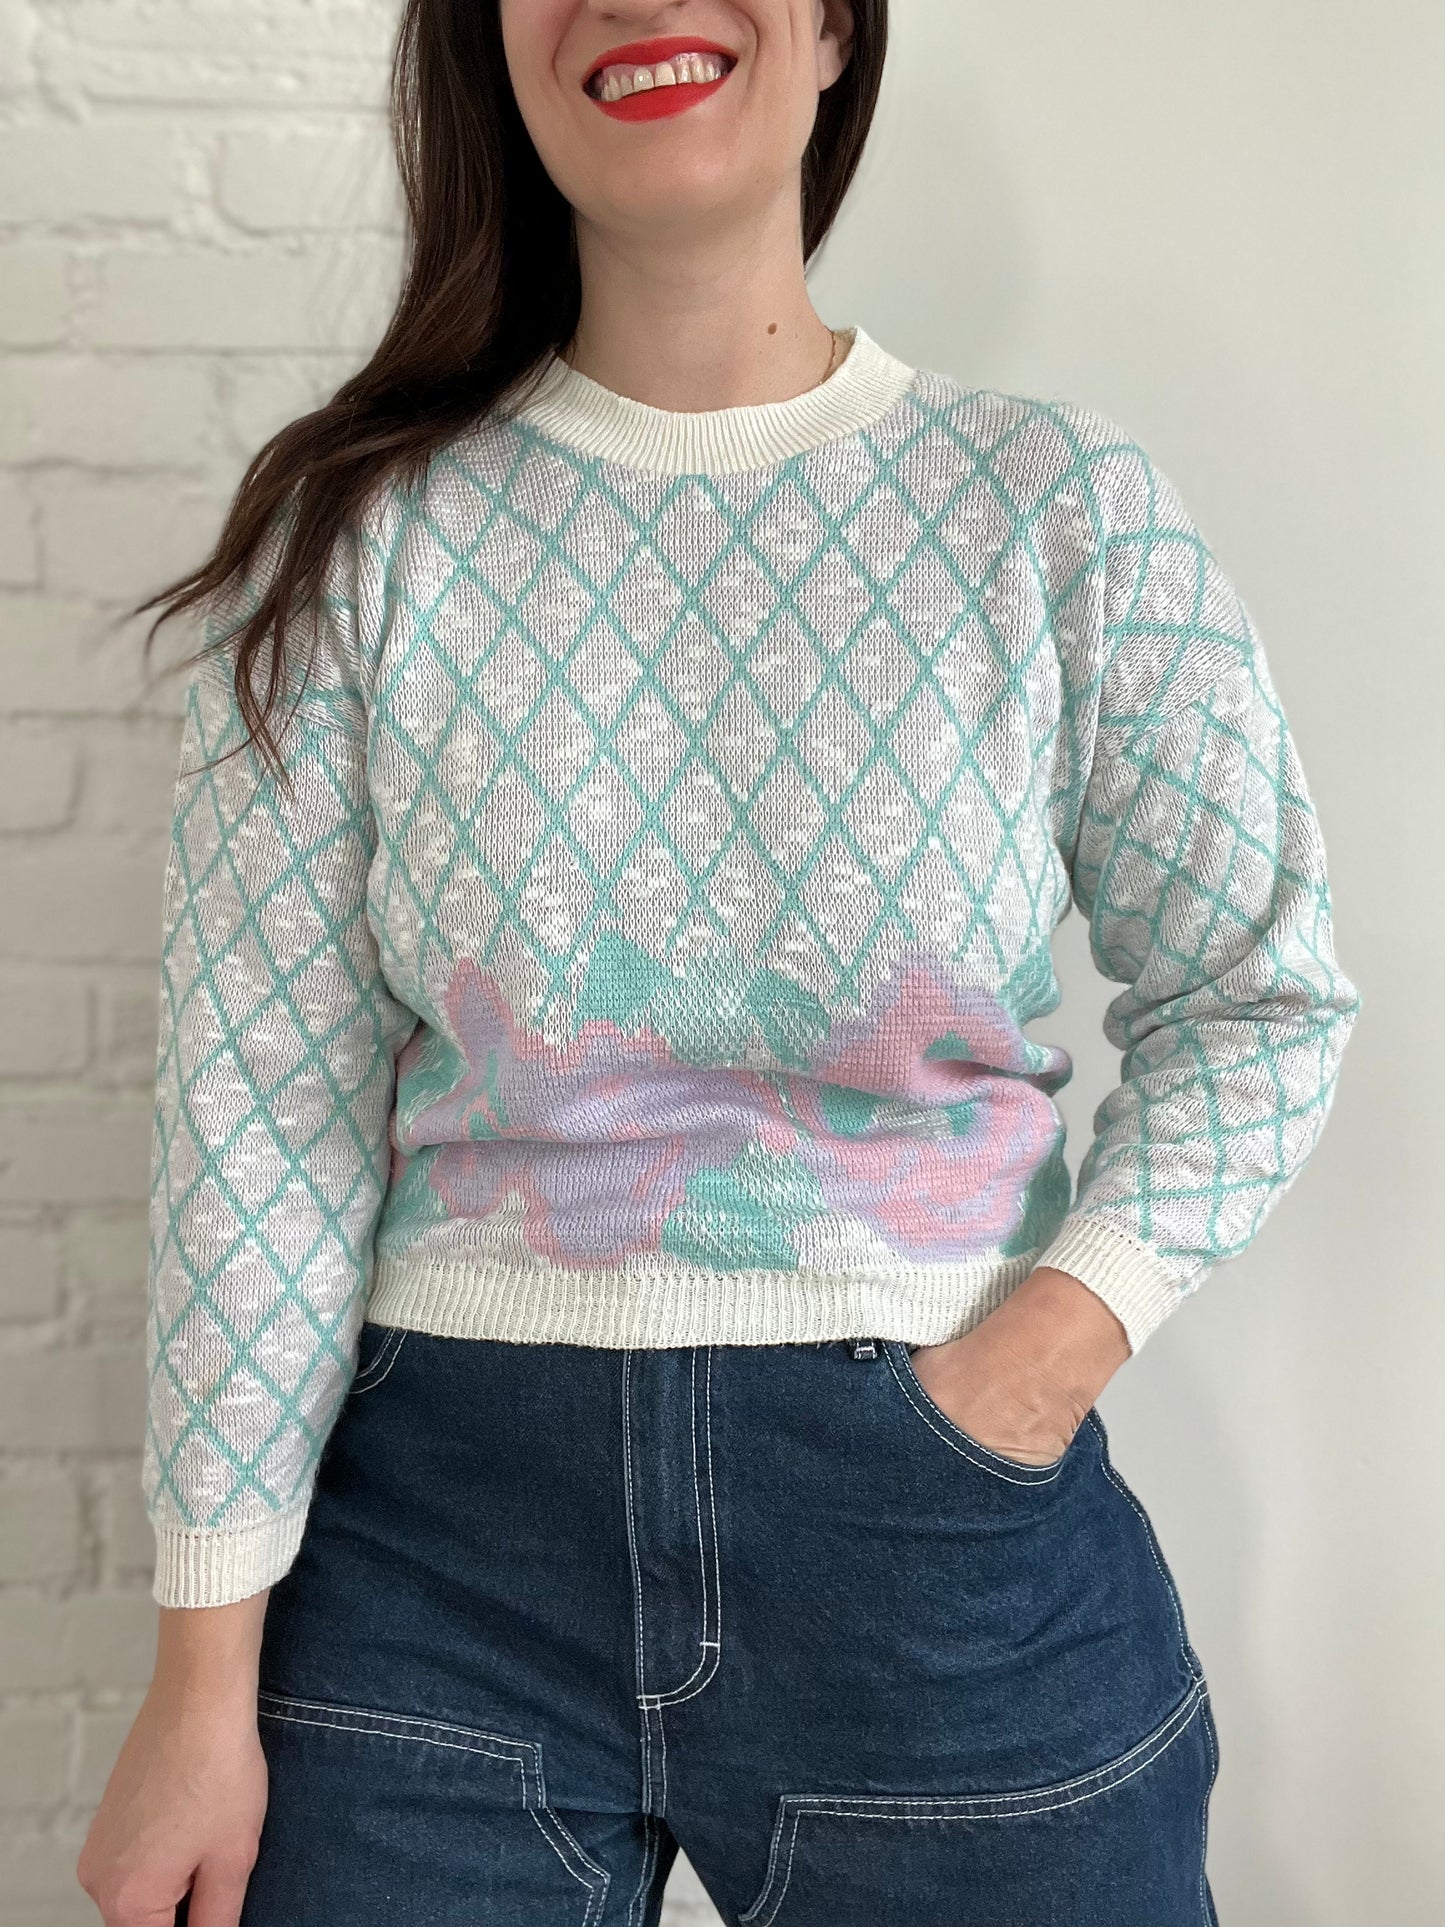 Abstract Roses Preppy Sweater - XS/S